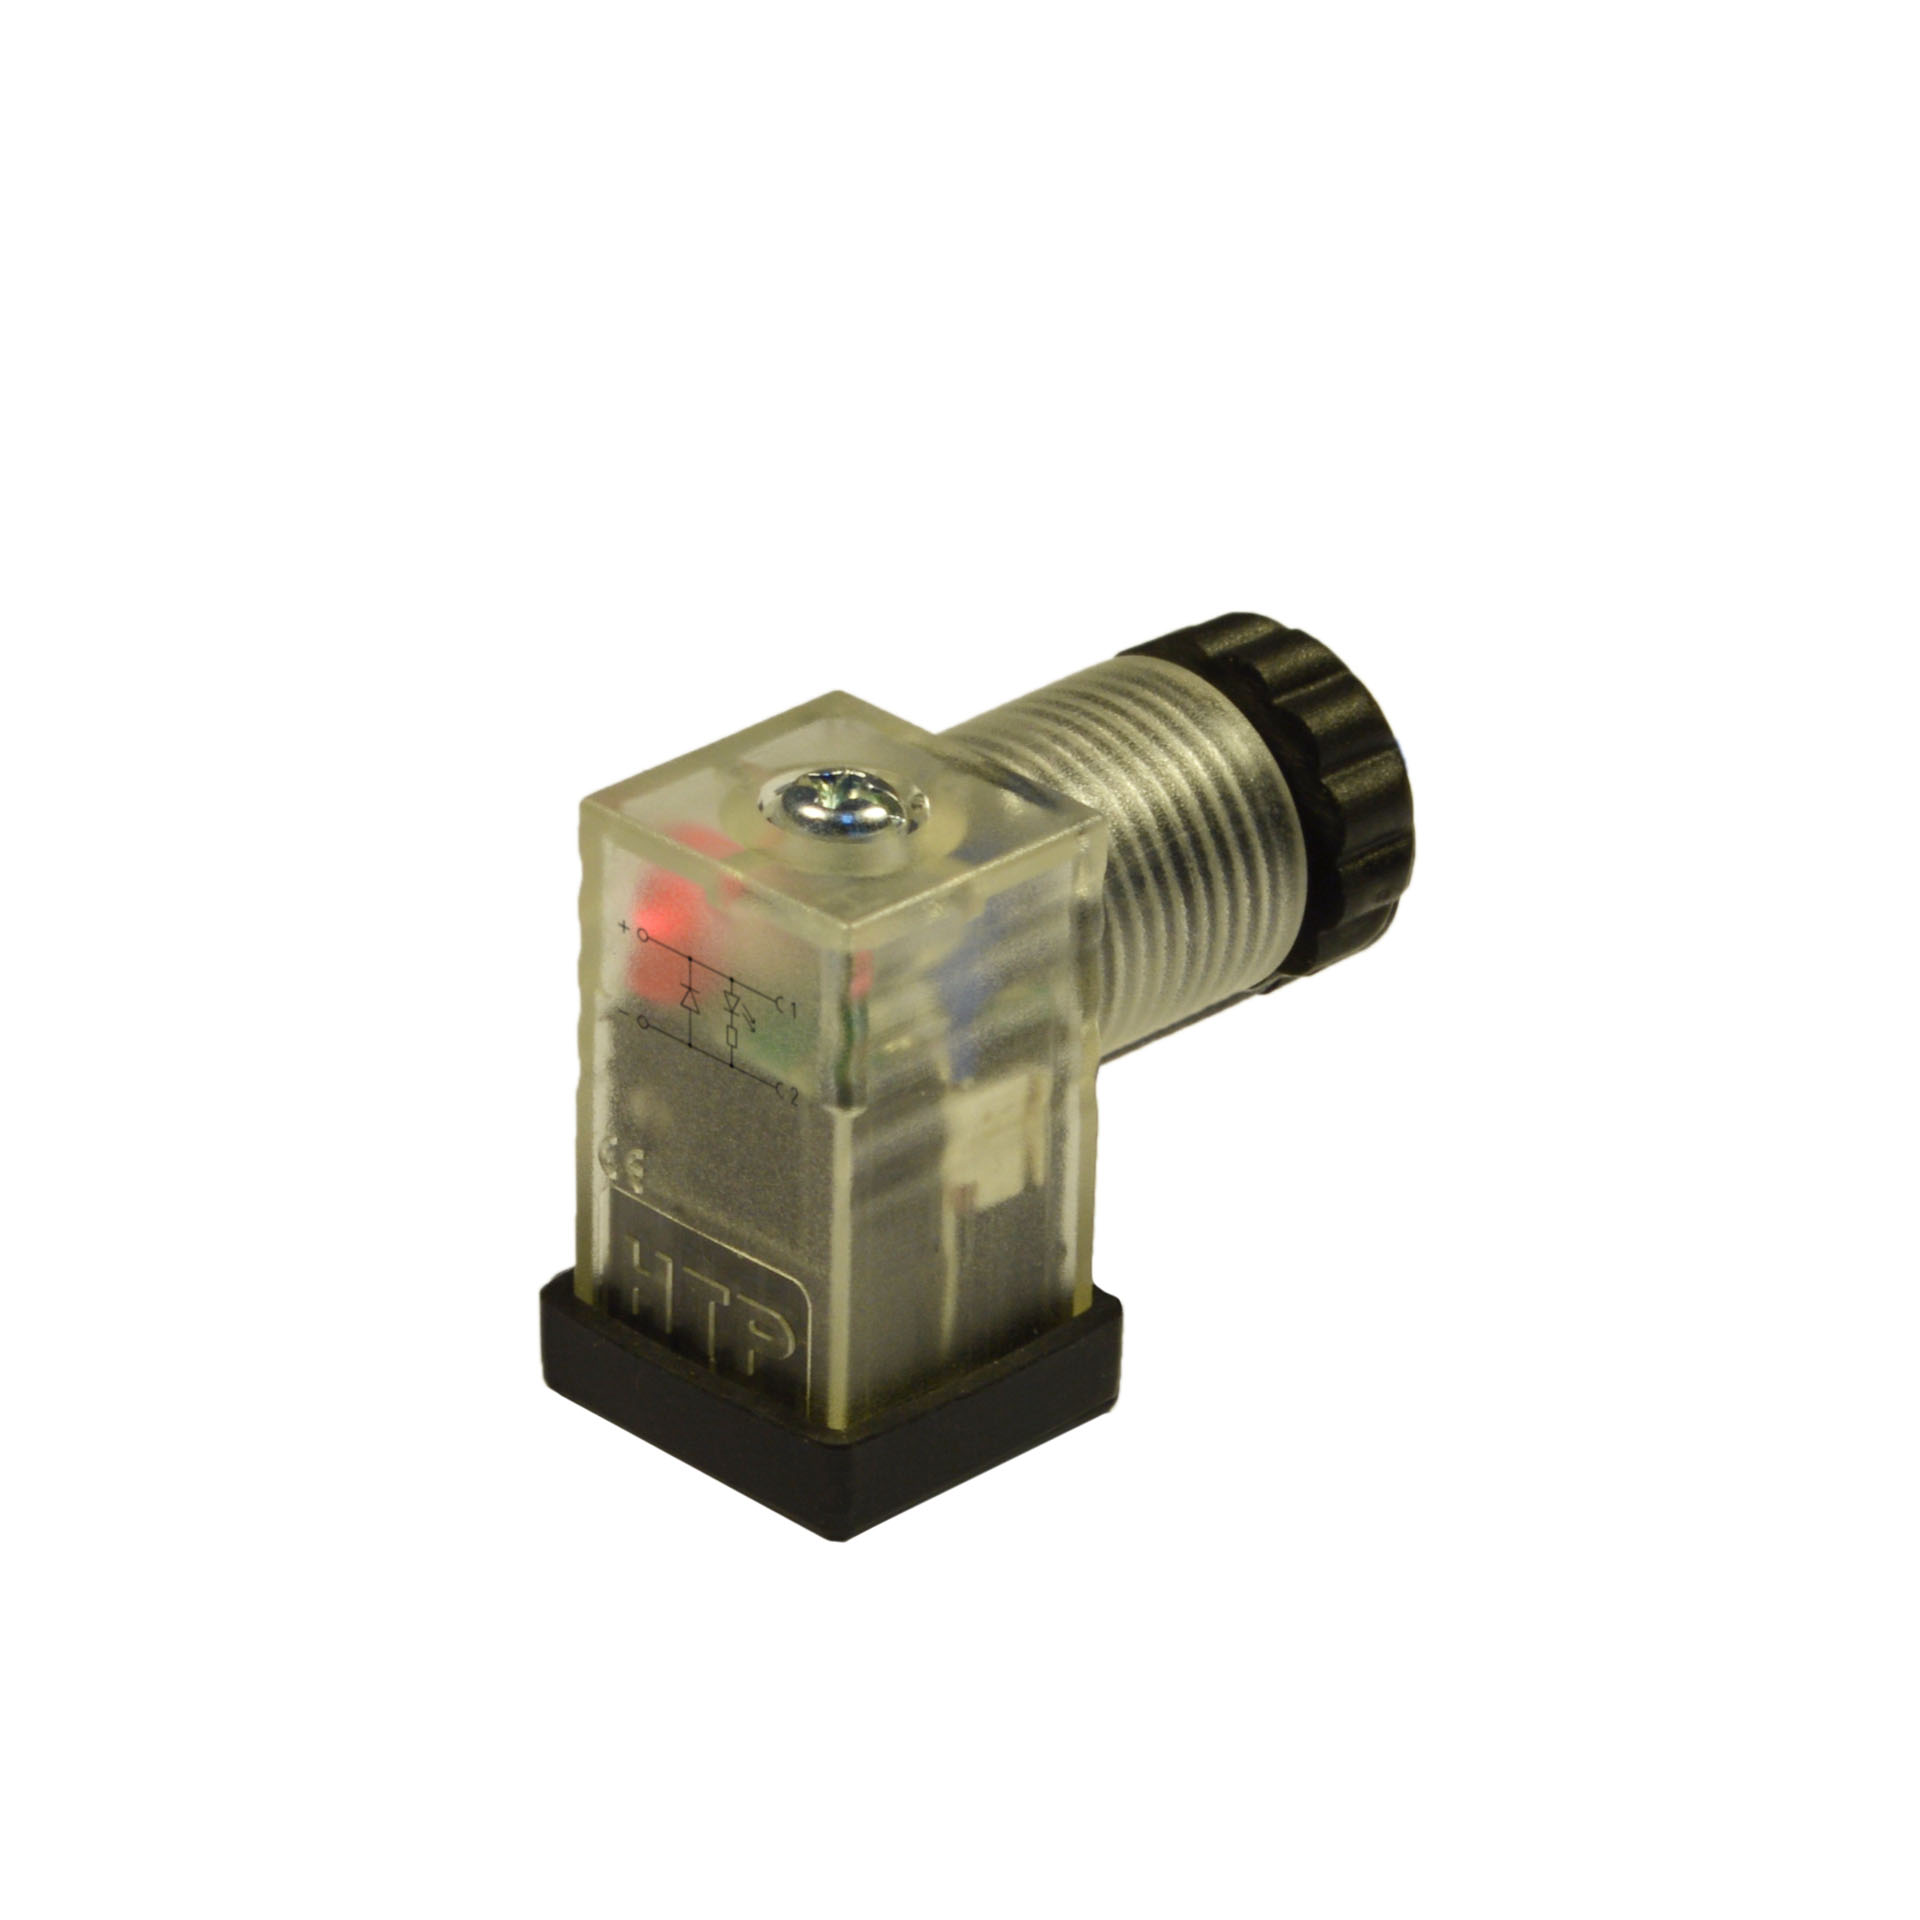 EN175301-803(typeC)field attachable,2p+PE(h.6),red LED+diode,115VDC,PG7